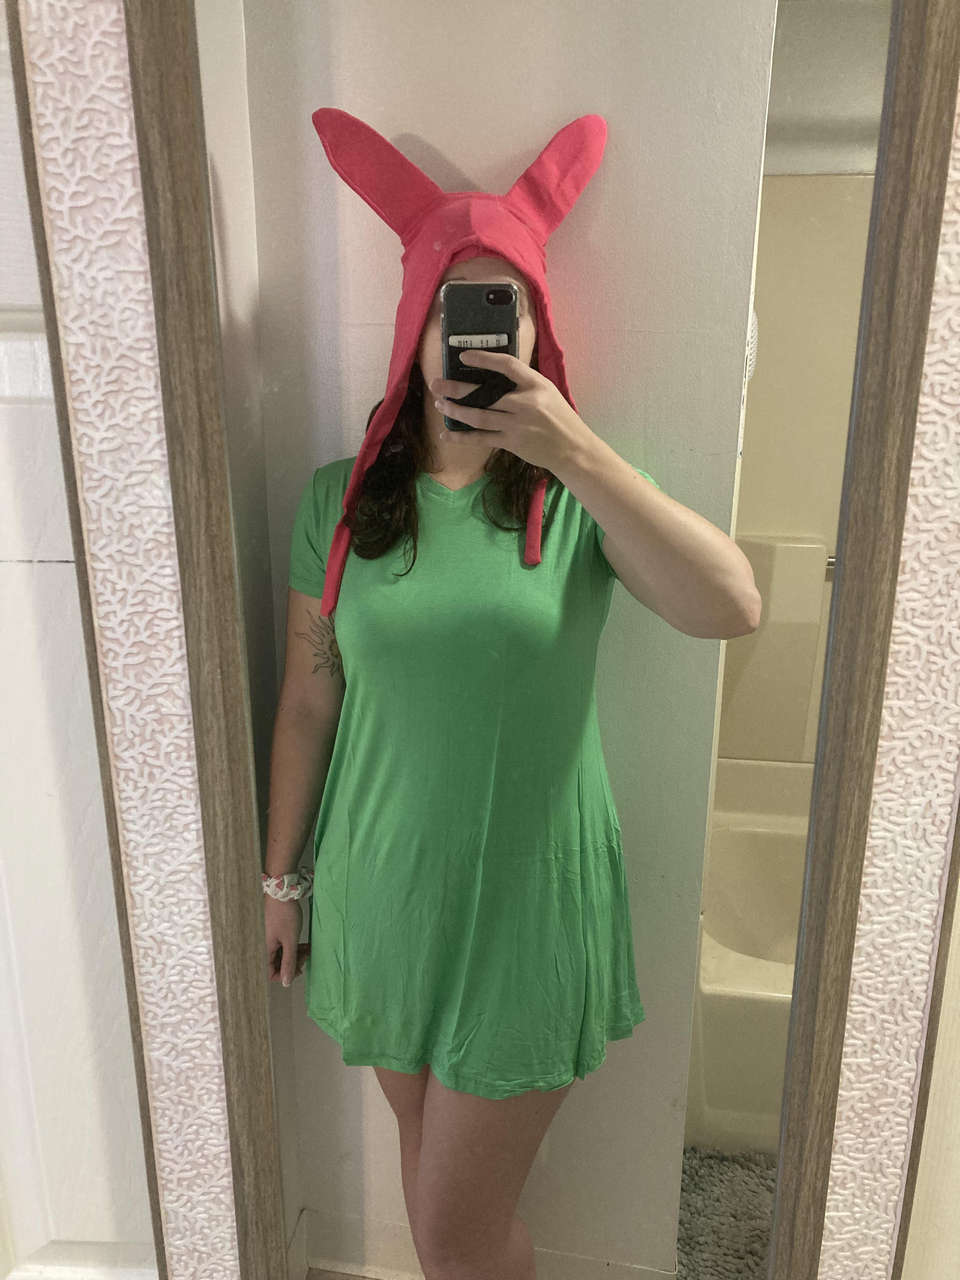 Any Love For Louise From Bobs Burgers By Sunflowercutie1